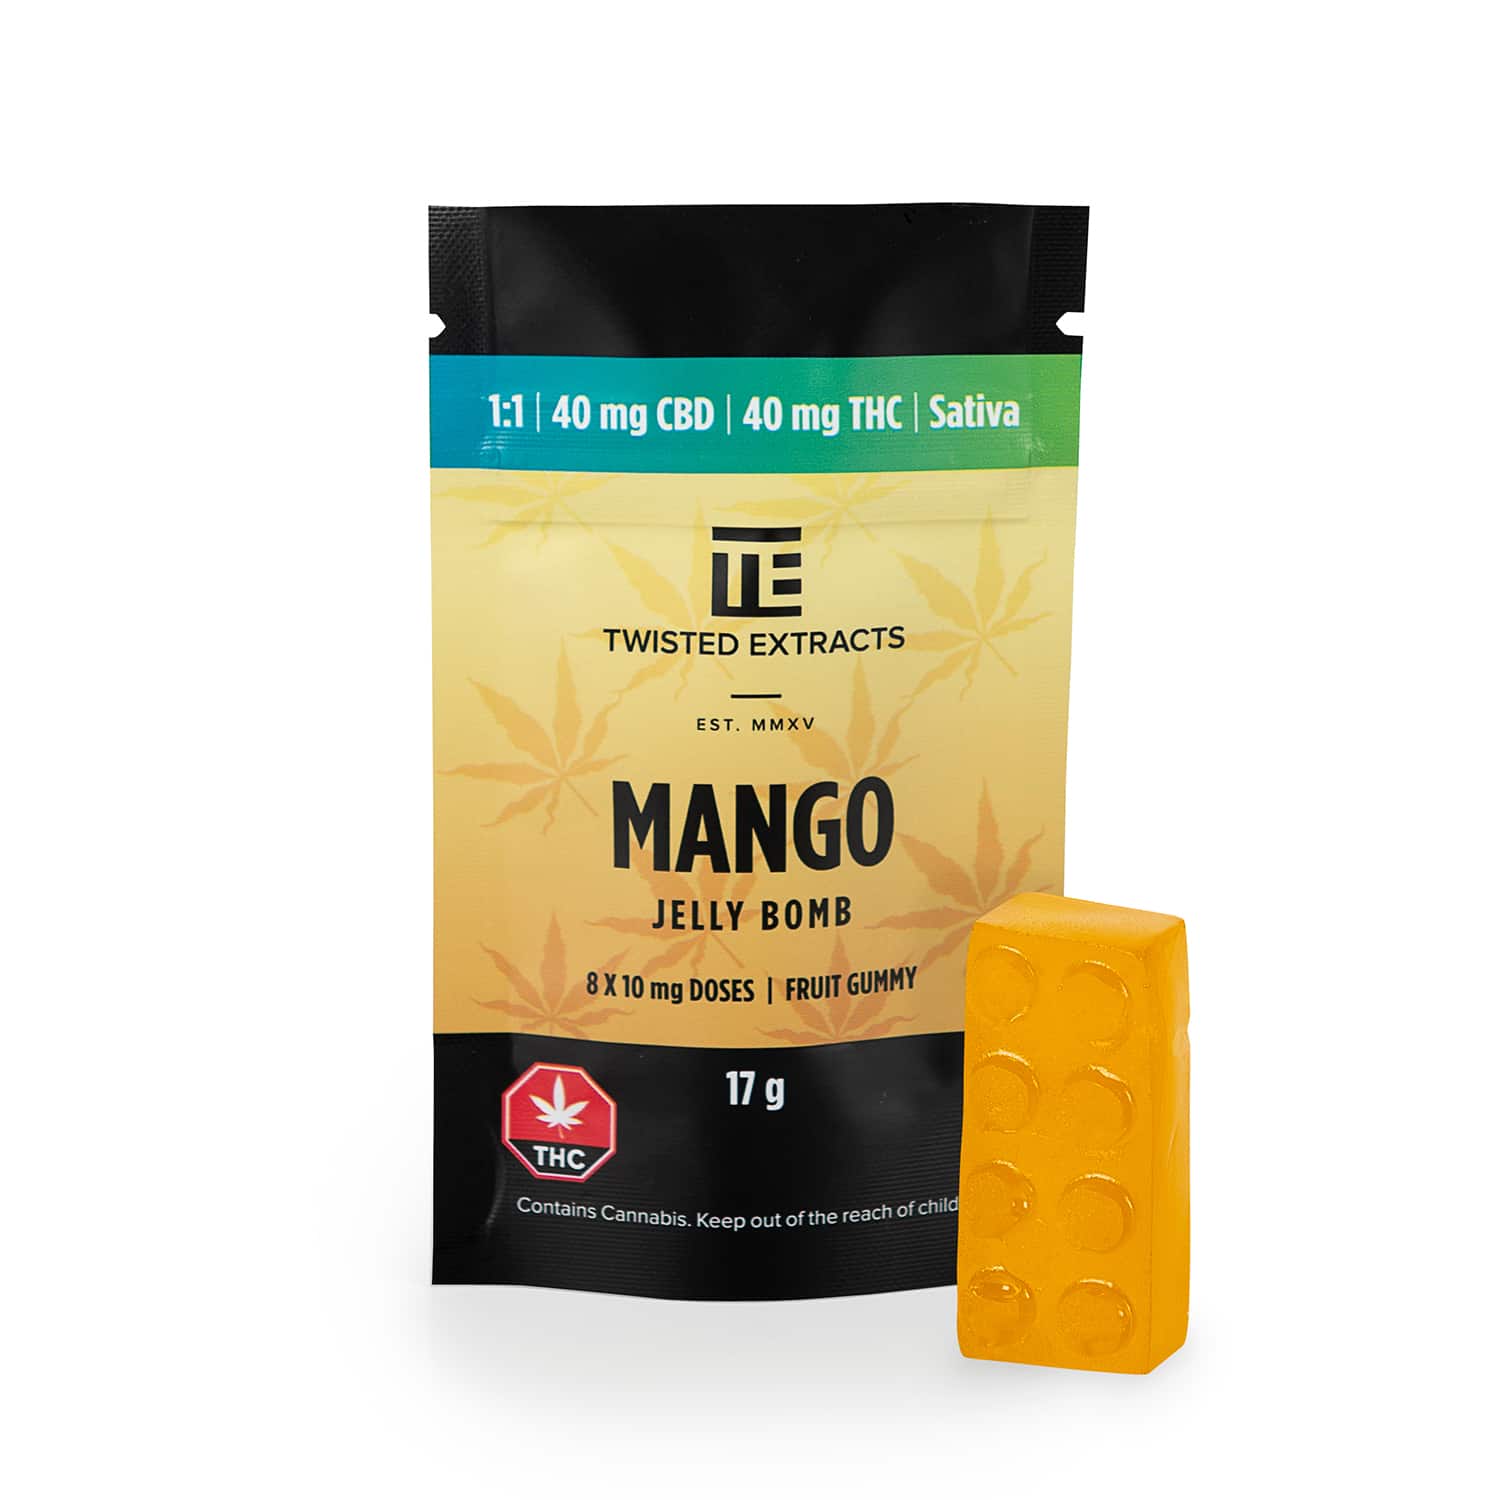 Twisted-extracts-mango-1to1-ganjawest-1.jpg